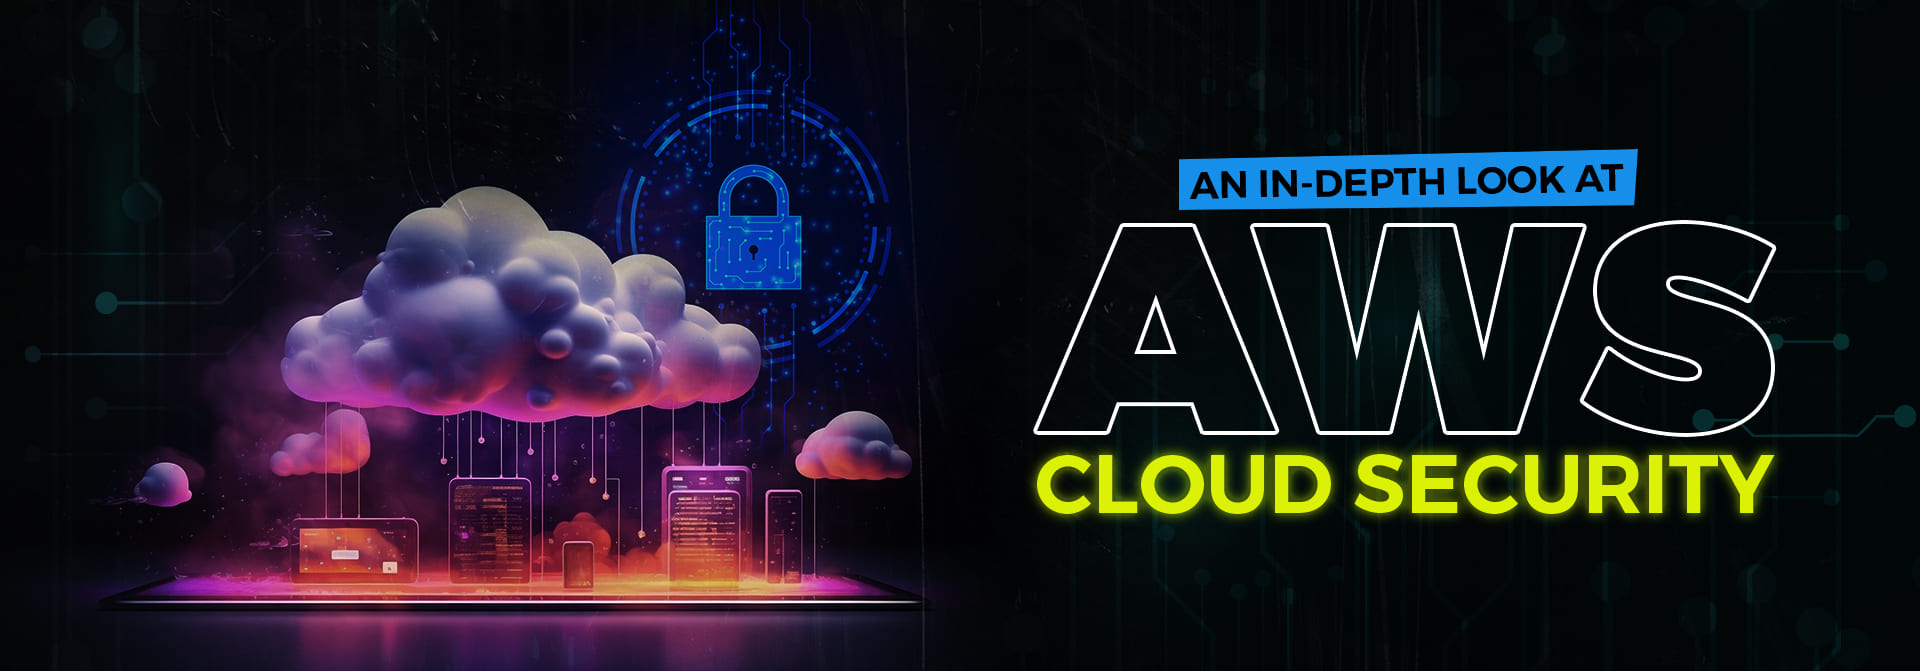 PAC_An In-Depth Look at AWS Cloud Security_main banner